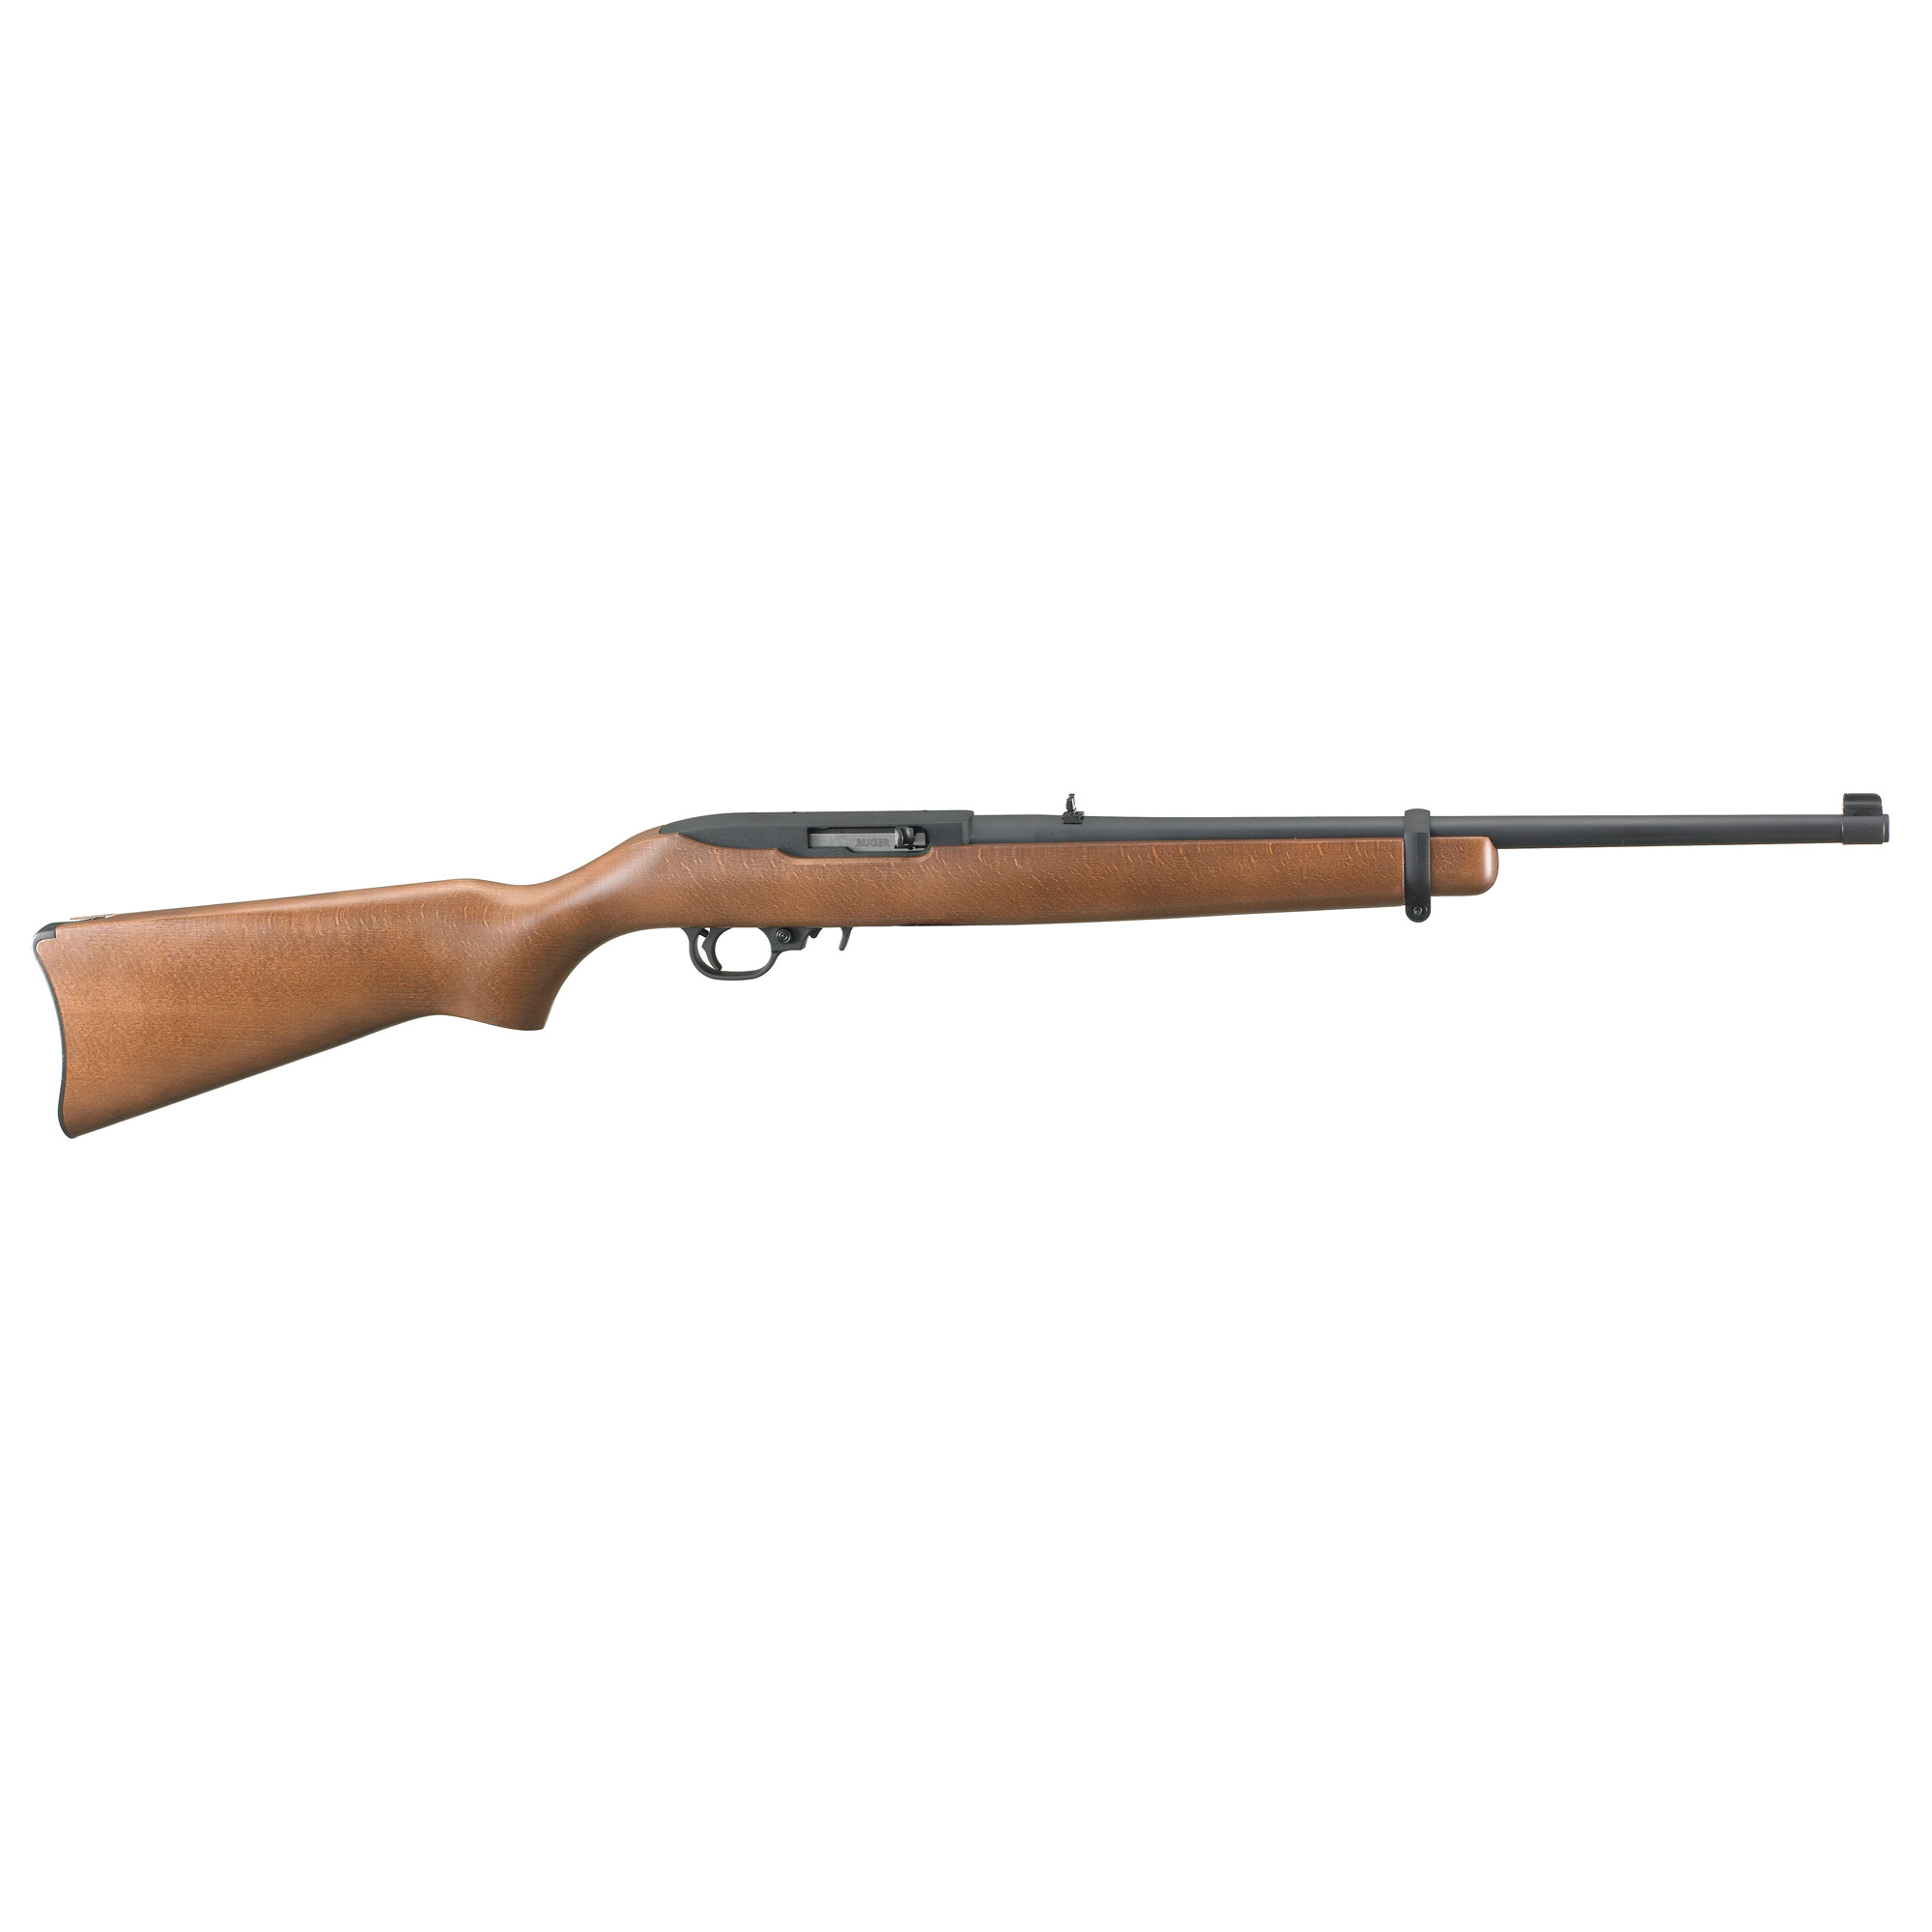 Ruger, 10/22 Carbine, Semi-automatic Rifle, 22 LR, 18.5" Barrel, Satin Black Finish, Alloy Steel, Hardwood Stock, Adjustable Rear and Gold Bead Front Sight, 10 Rounds, 1 Magazine